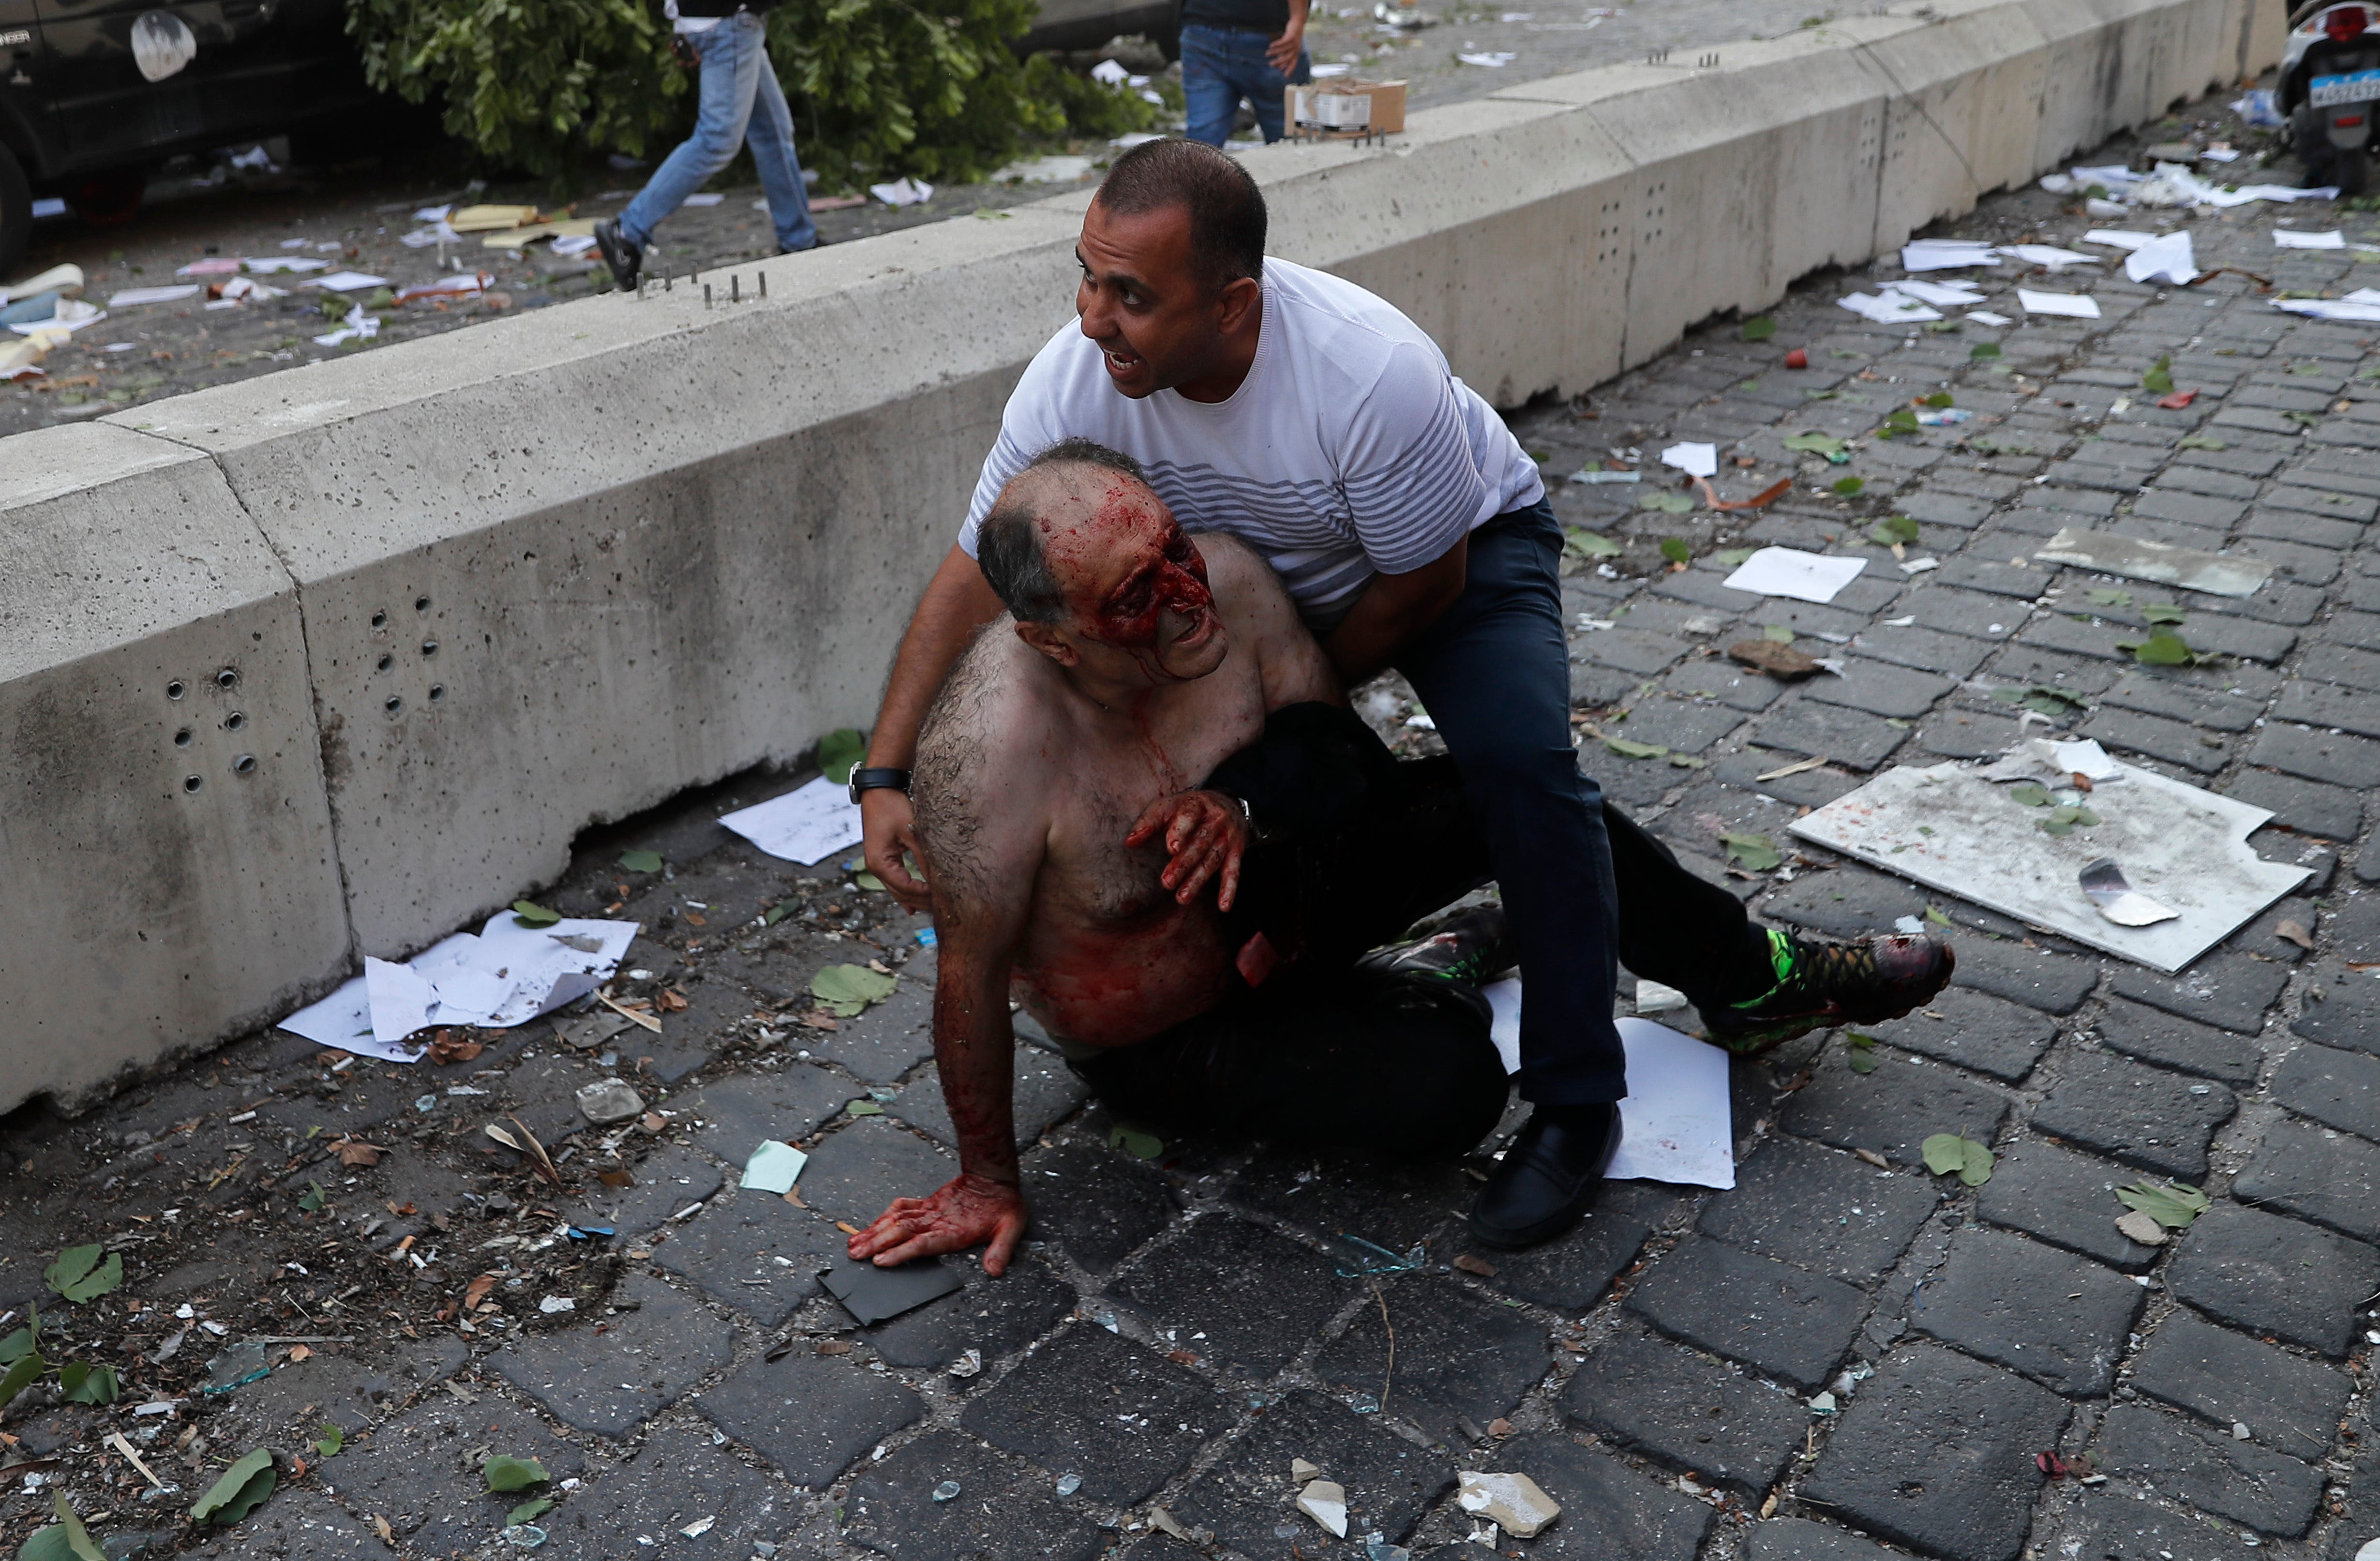 Lebanese man helps an injured man who was wounded.